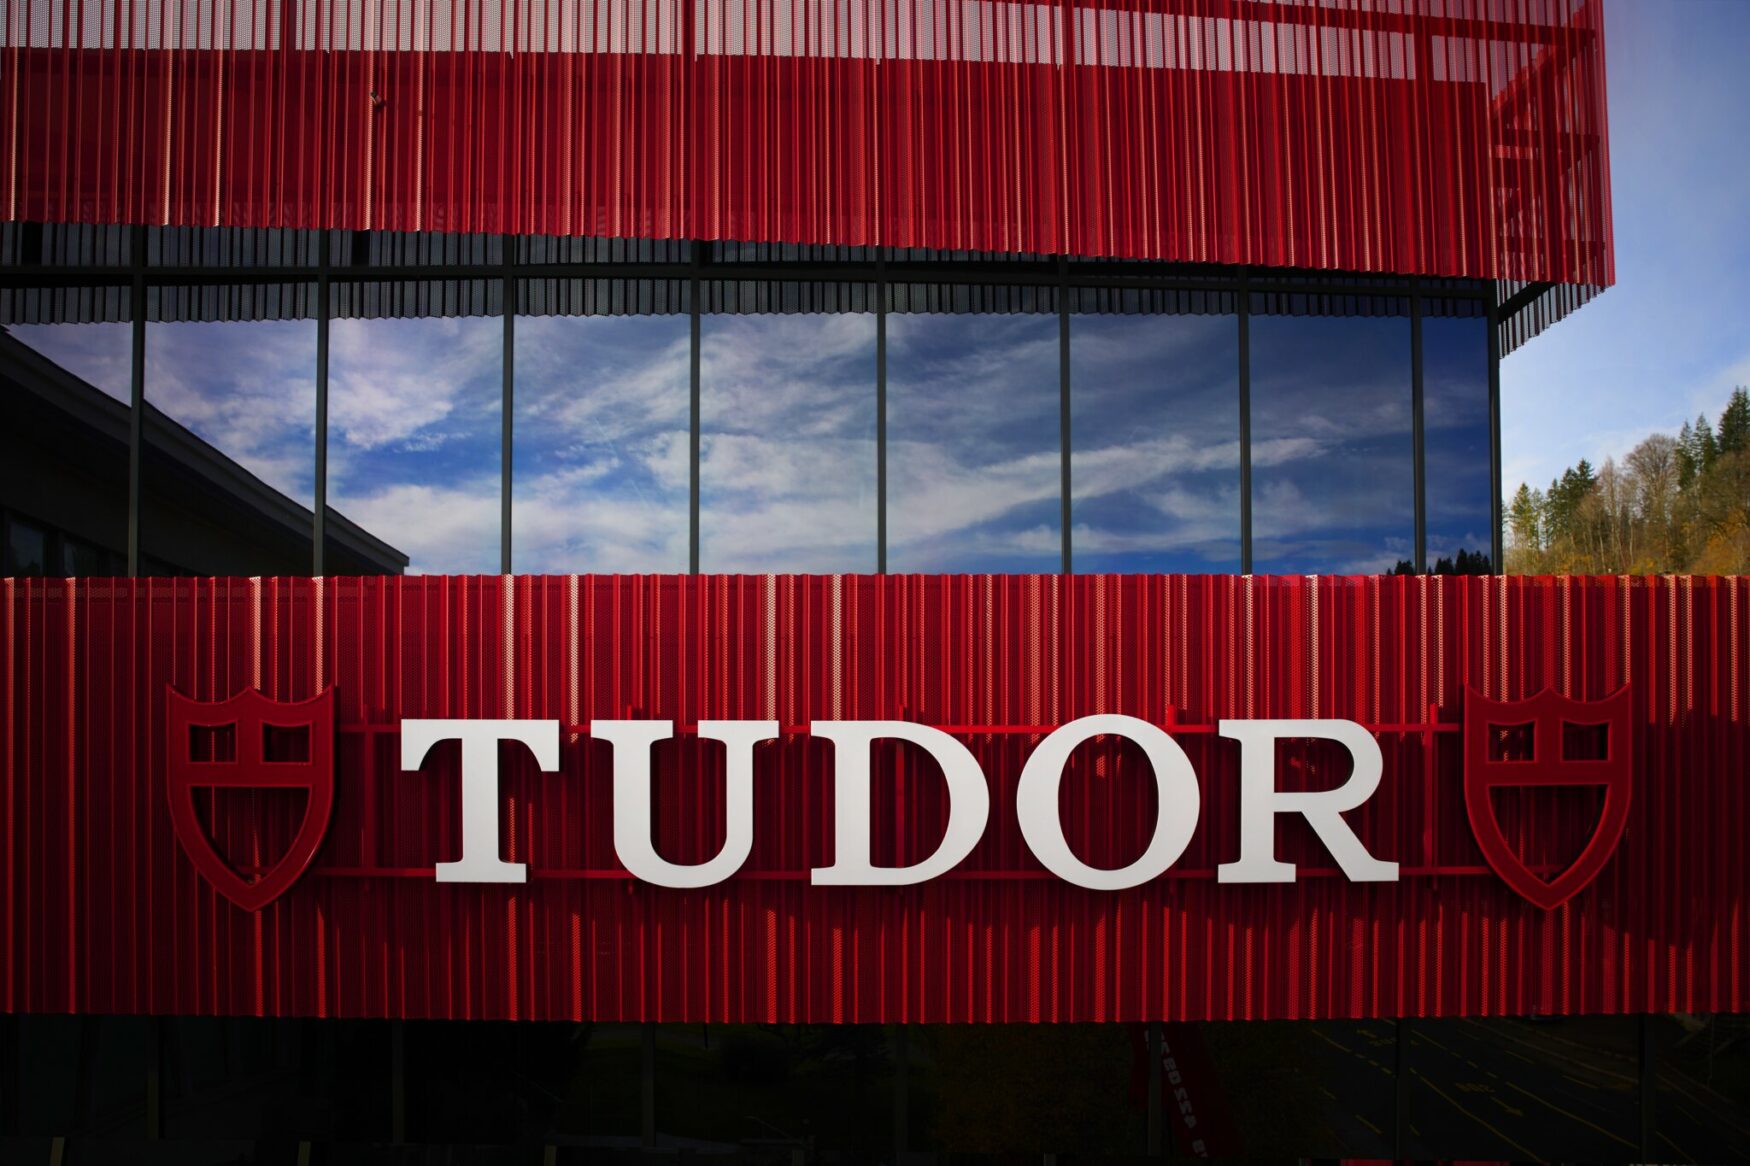 The secrets behind the Tudor manufacture